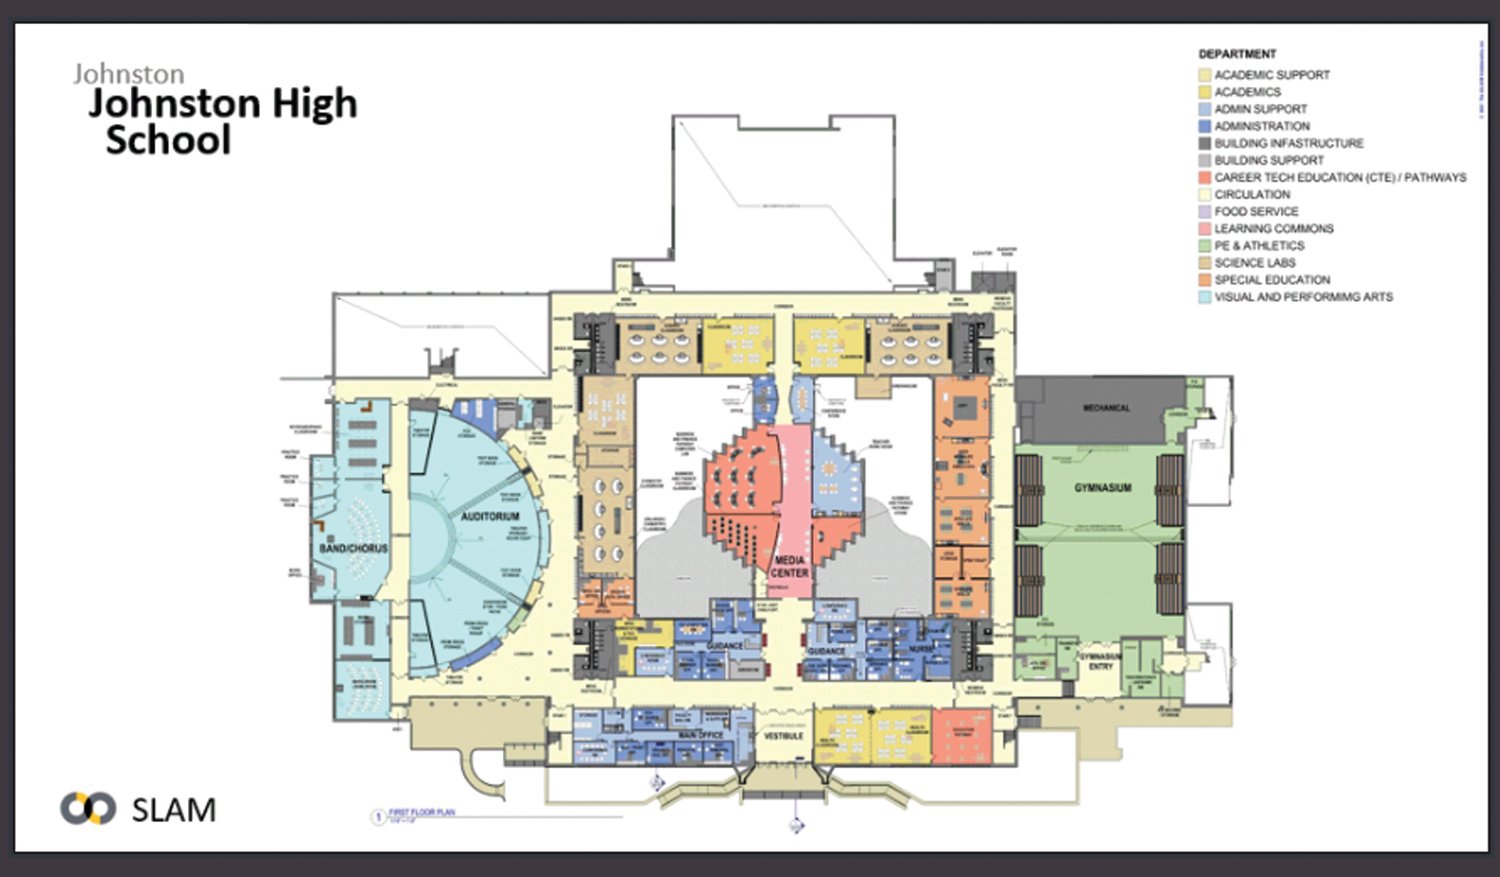 NEW JHS: Planners hope to unveil the new modernized high school in late summer of 2024. The new Johnston High School will cover approximately 799 students in grades 9-12.